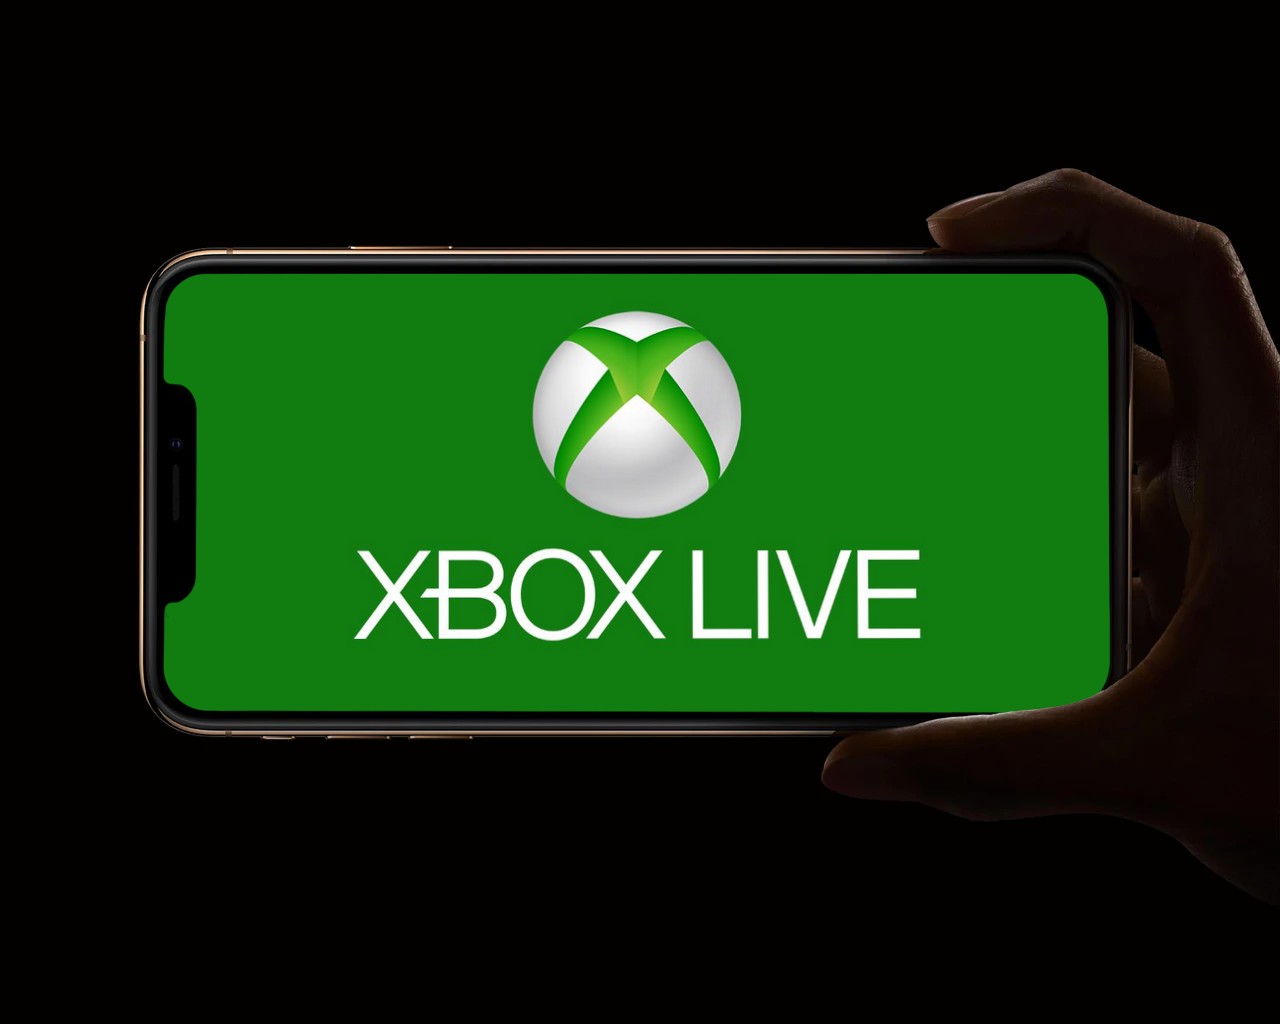 Microsoft SDK to Bring Your Xbox Live Data to Your iOS 